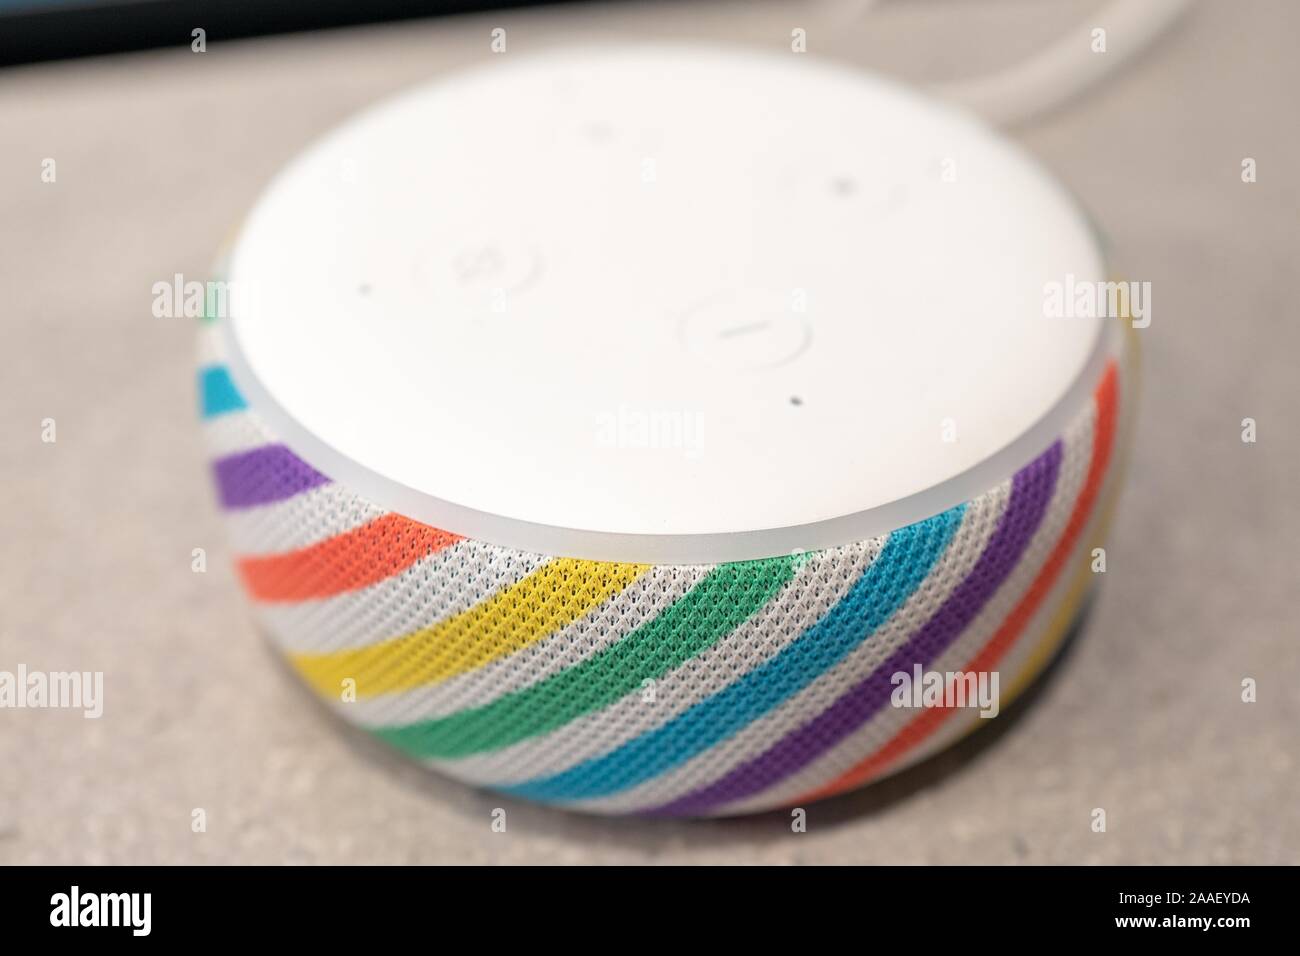 Close-up of newly-released Amazon Echo Dot Kids Edition smart speaker, designed for use by children, with rainbow color scheme, using the Alexa voice assistant, August 31, 2019. () Stock Photo